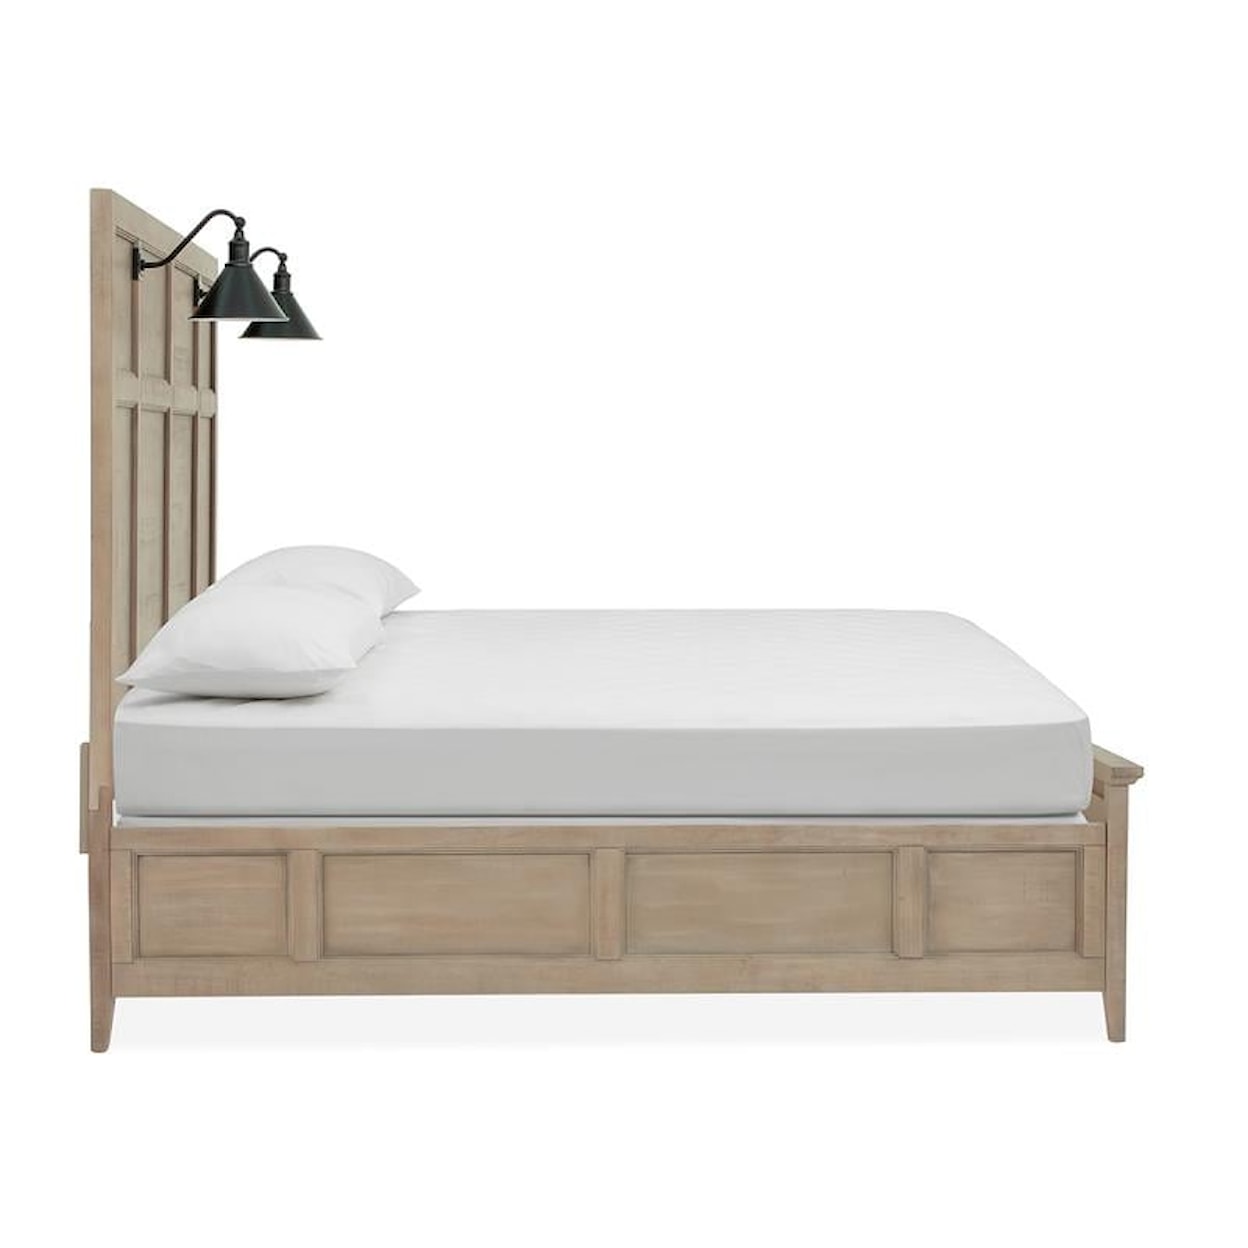 Magnussen Home Paxton Place Bedroom California King Lamp Panel Bed